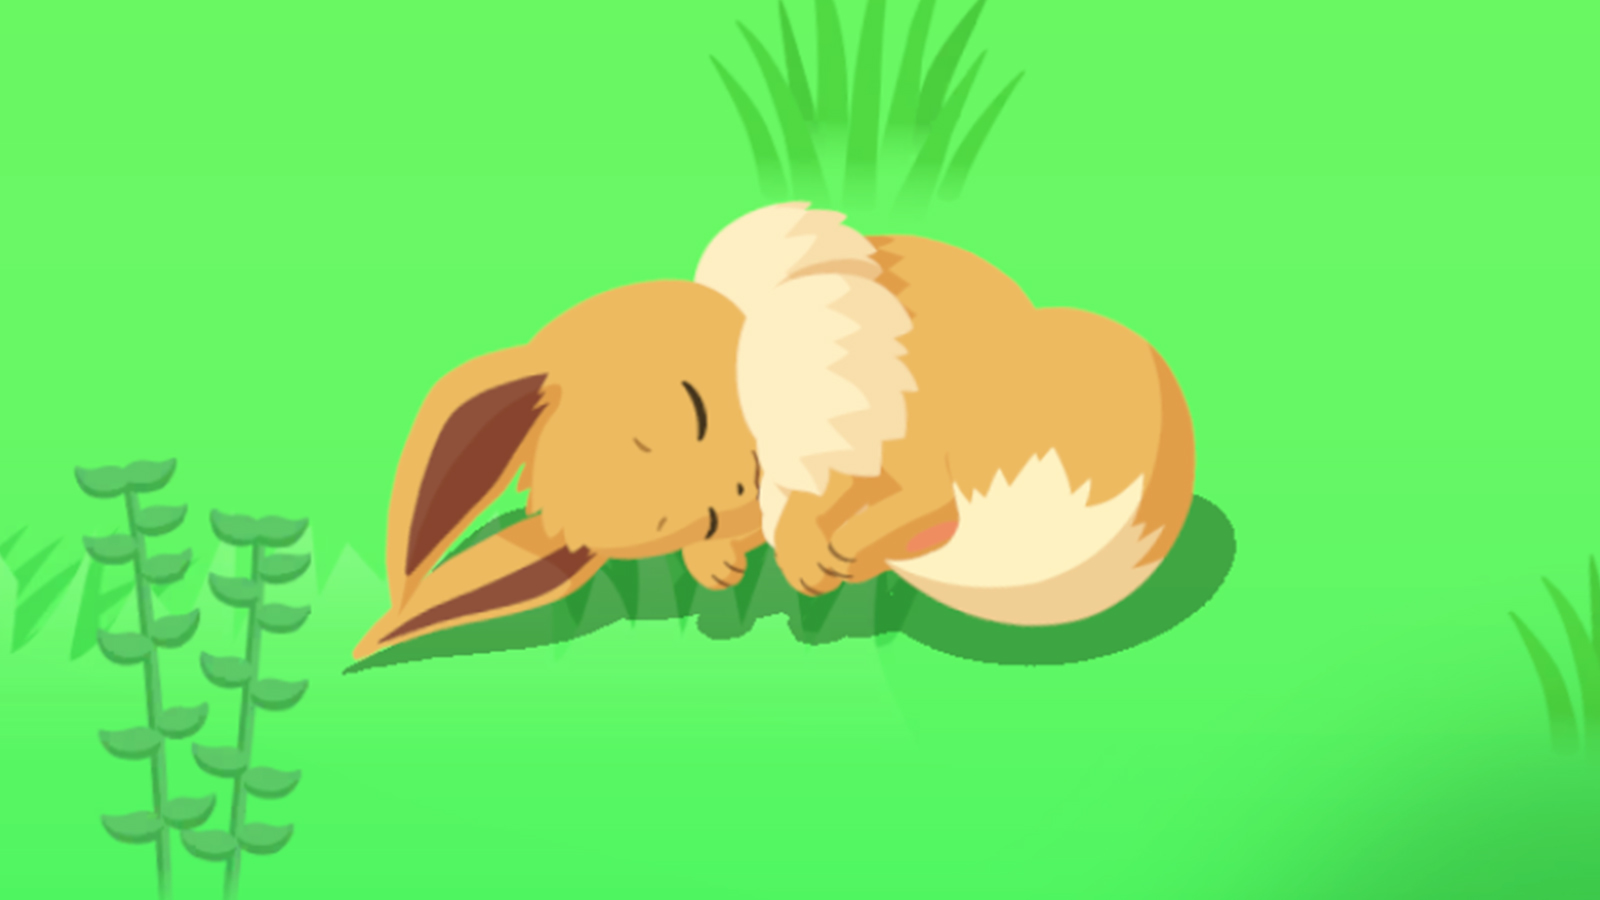 Which eevee should I focus on and which evolution? : r/PokemonSleep